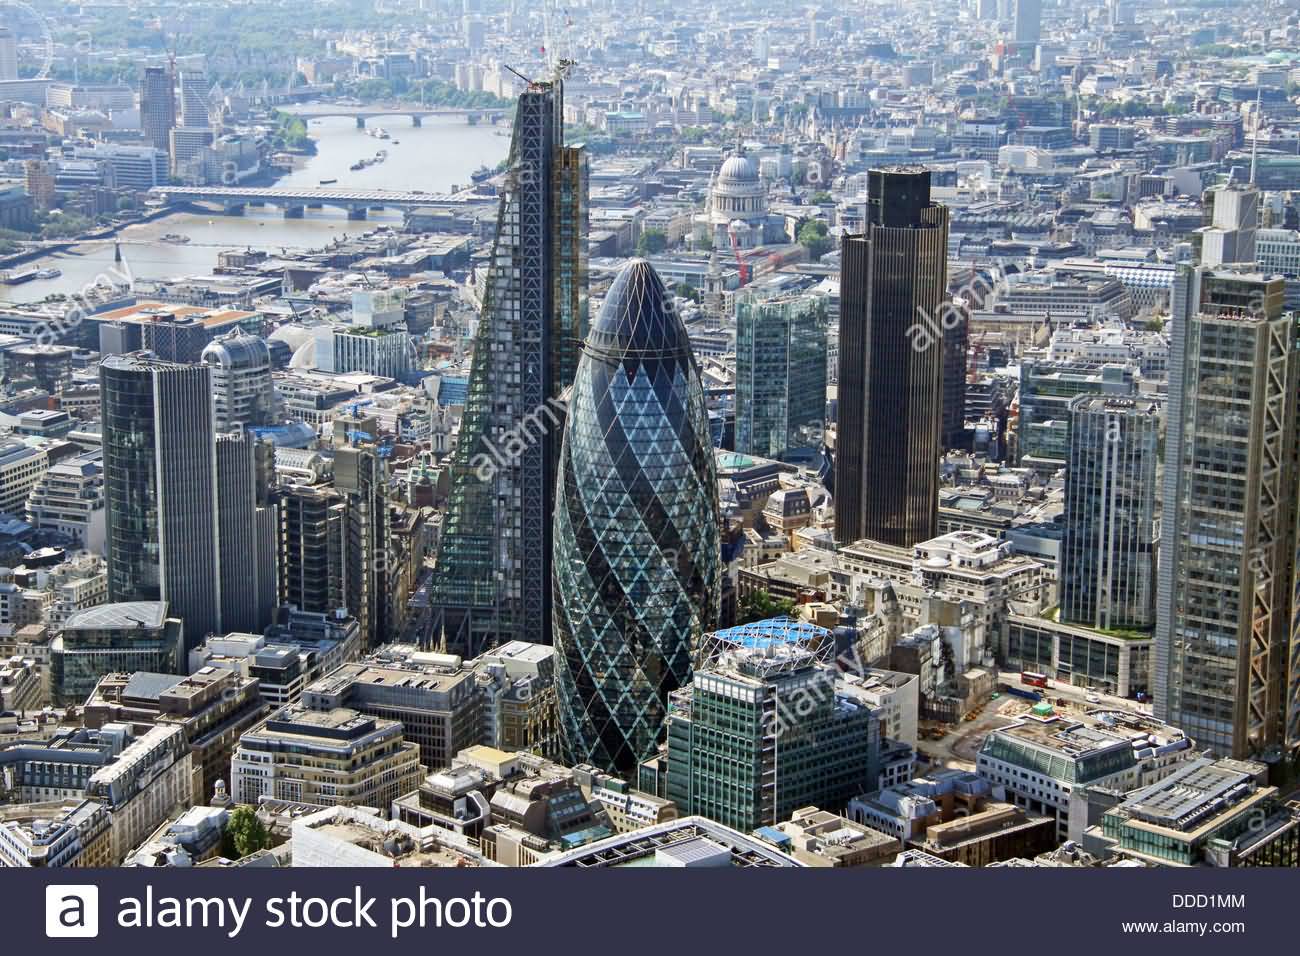 Aerial View Of The Gherkin Tower With Cheese Grater And NatWest Tower